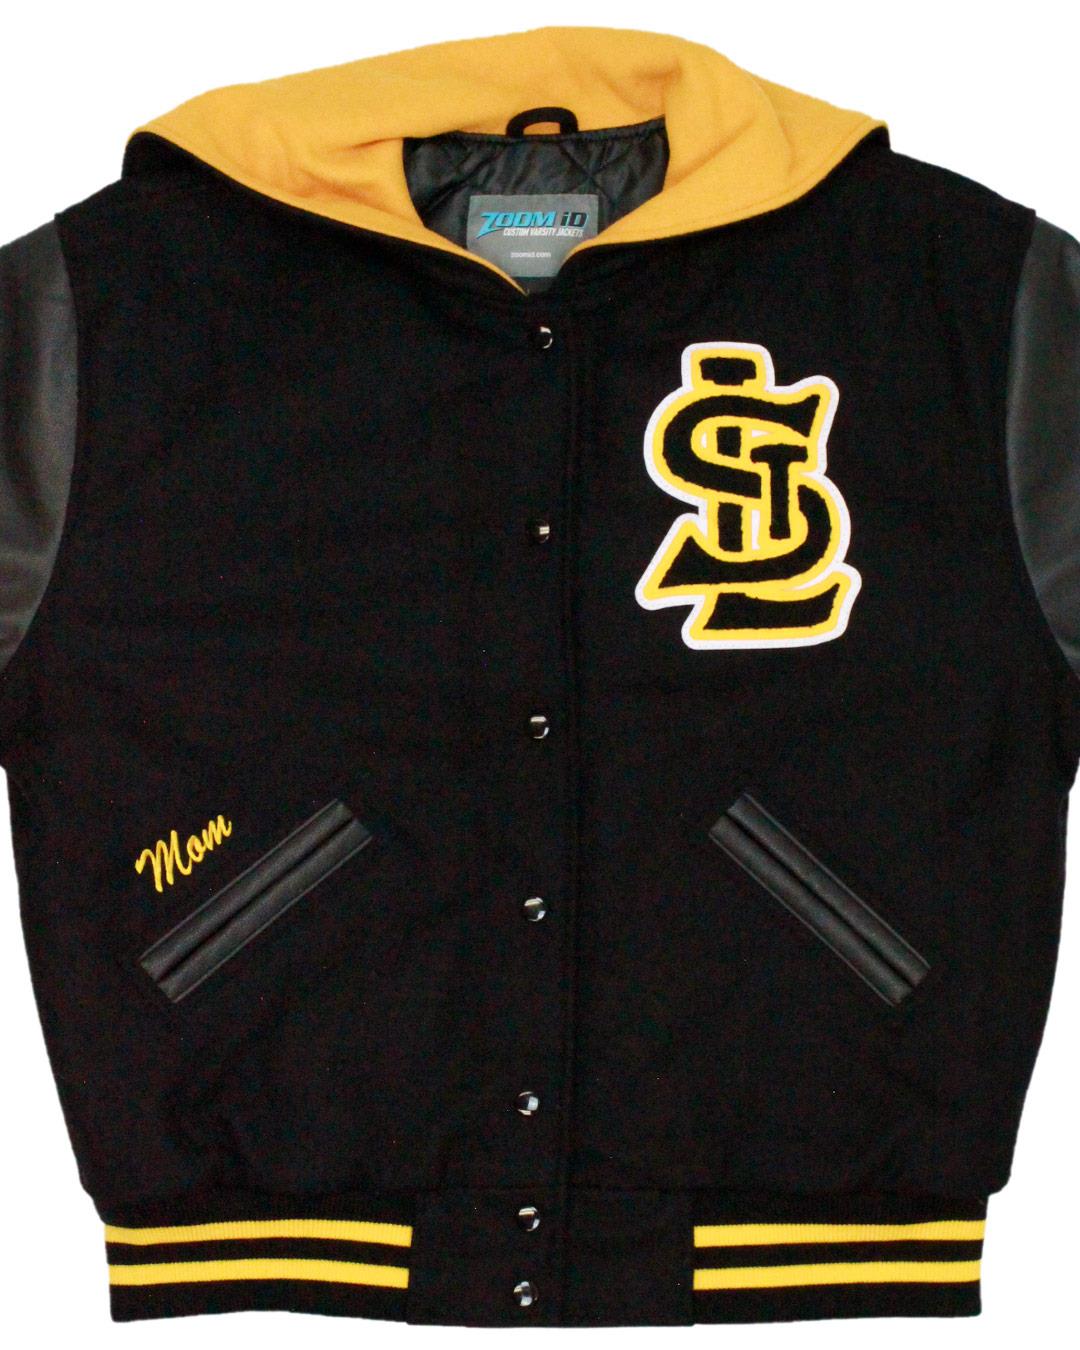 St. Laurence High School Vikings Letter Jacket, Burbank, IL - Front 